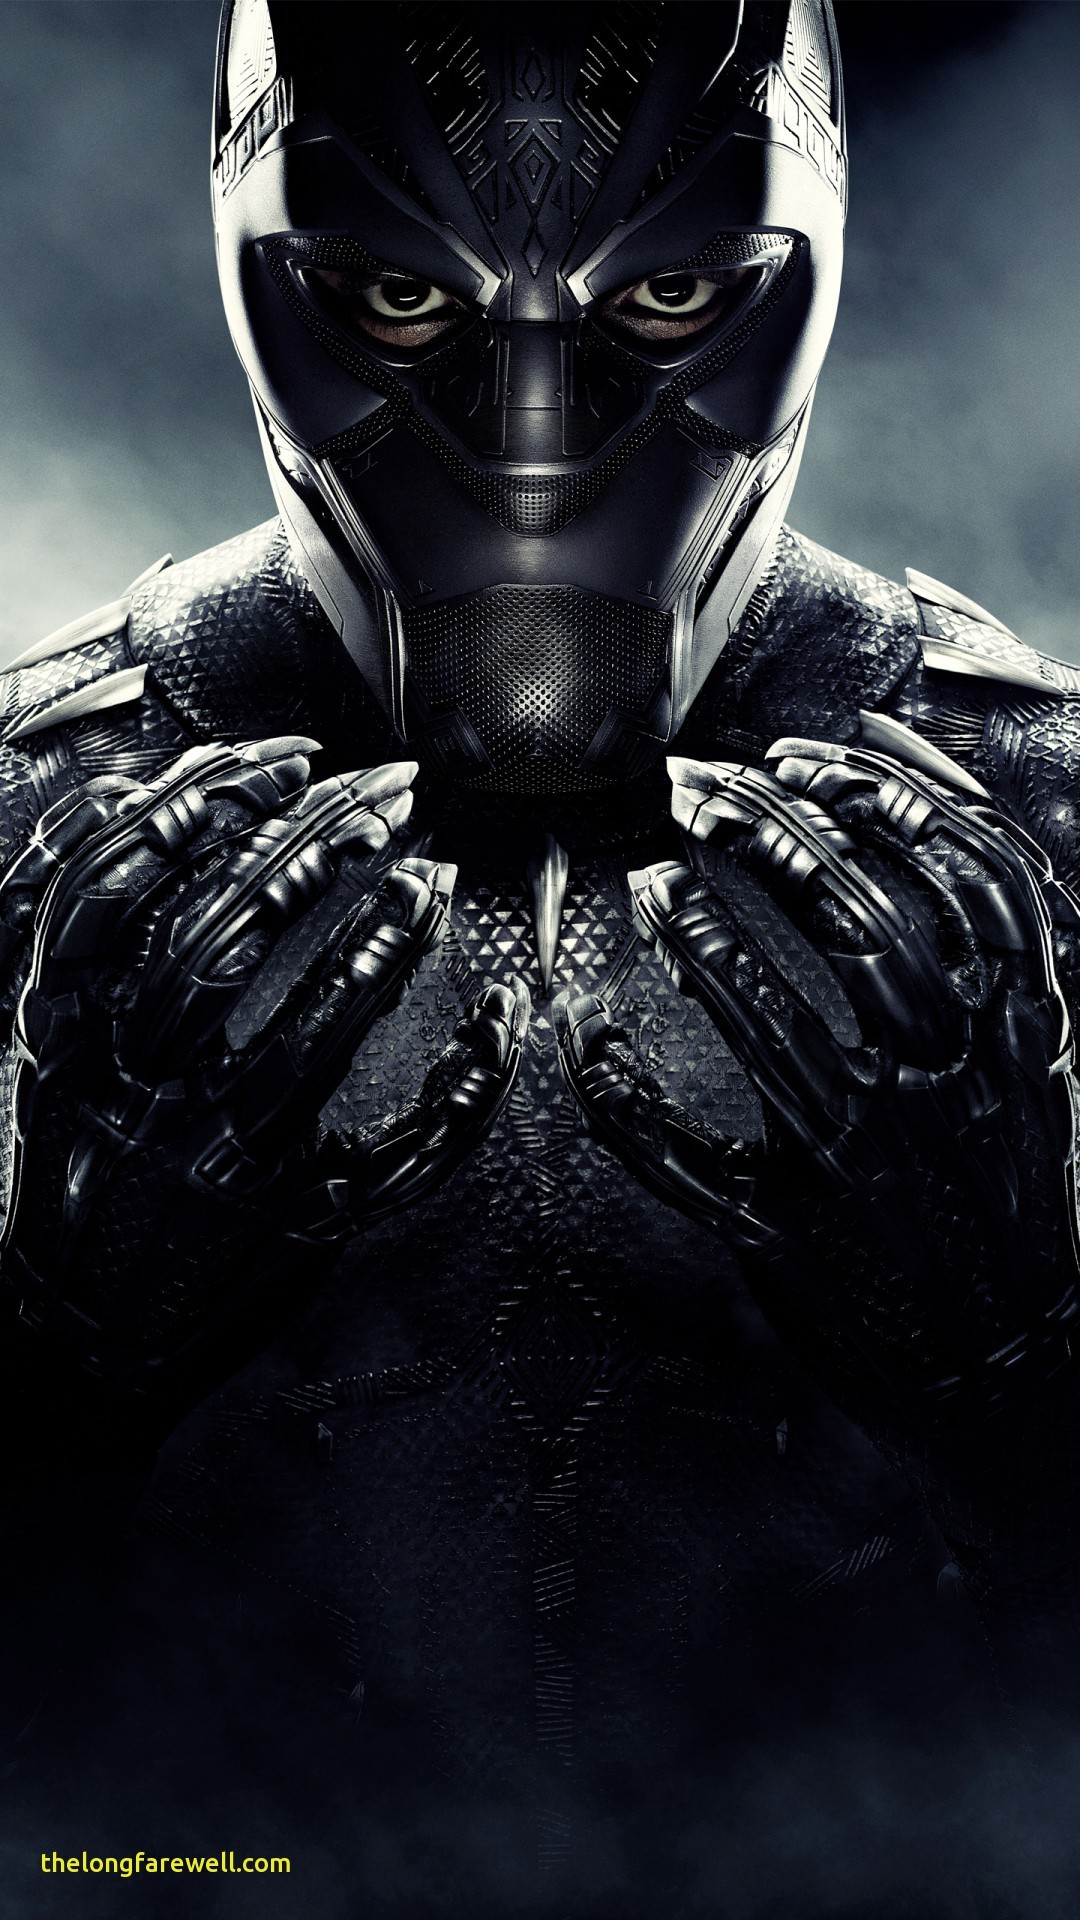 1080x1920, Iphone 6 6s Plus 7 Plus 8 Plus Resolutions - Black Panther Hd Wallpapers For Android - HD Wallpaper 